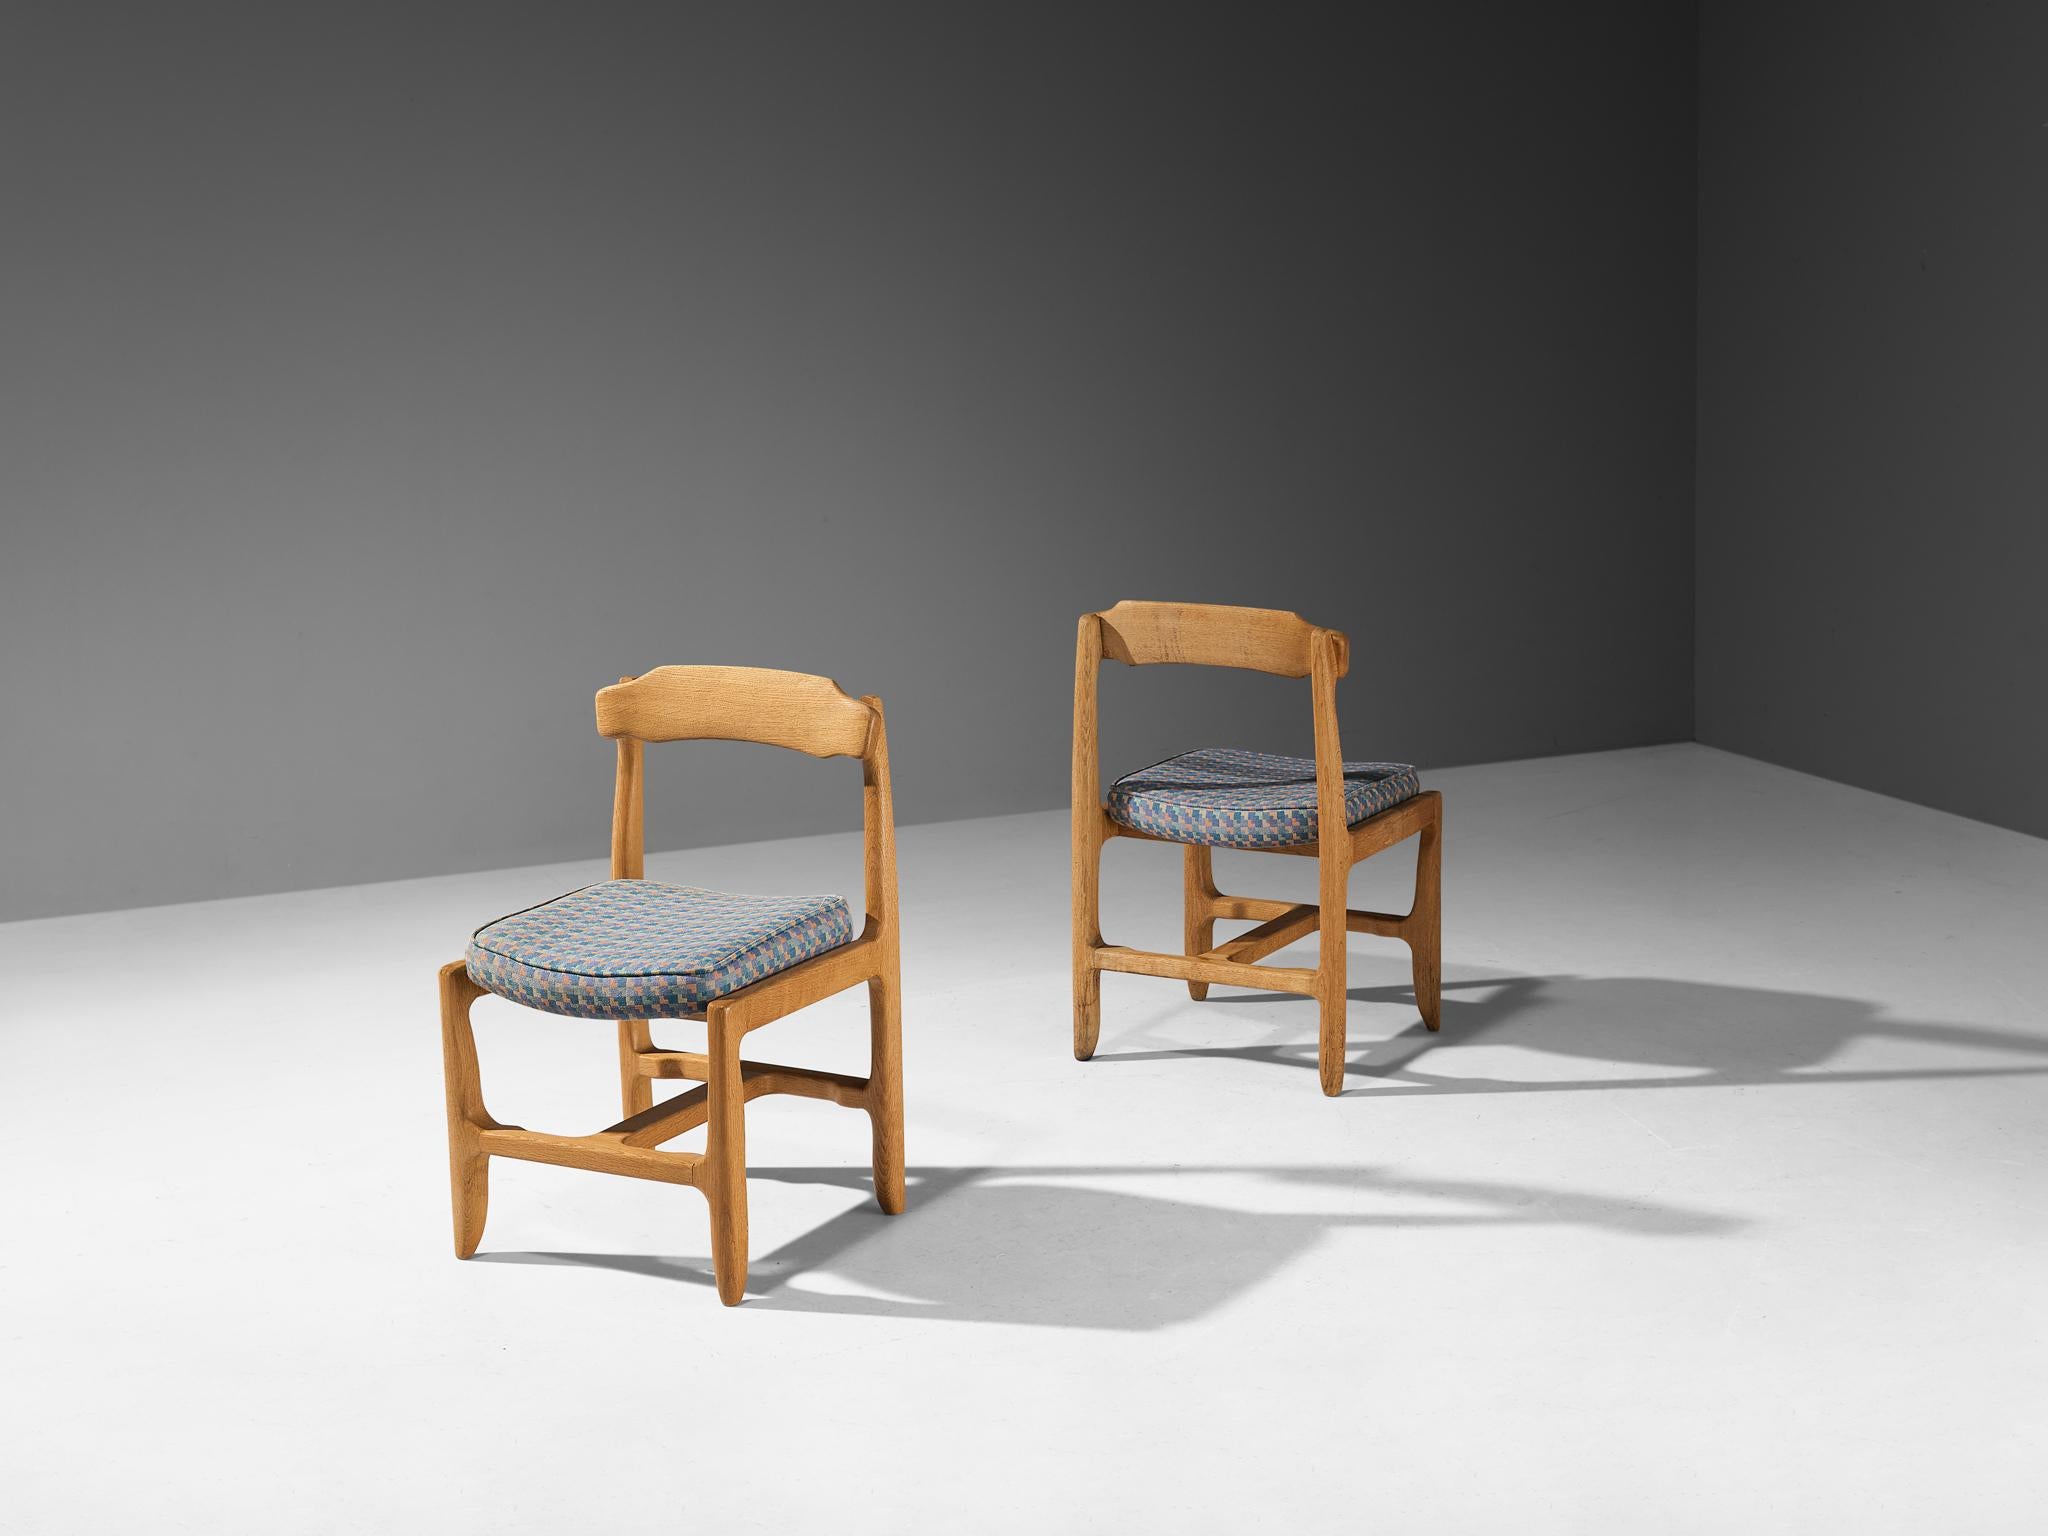 Guillerme et Chambron pair of dining chairs, solid oak, fabric, France, 1960s

These distinctive chairs in beautifully patinated oak are designed by the French duo Jacques Chambron (1914-2001) and Robert Guillerme, (1913-1990). These dining chair